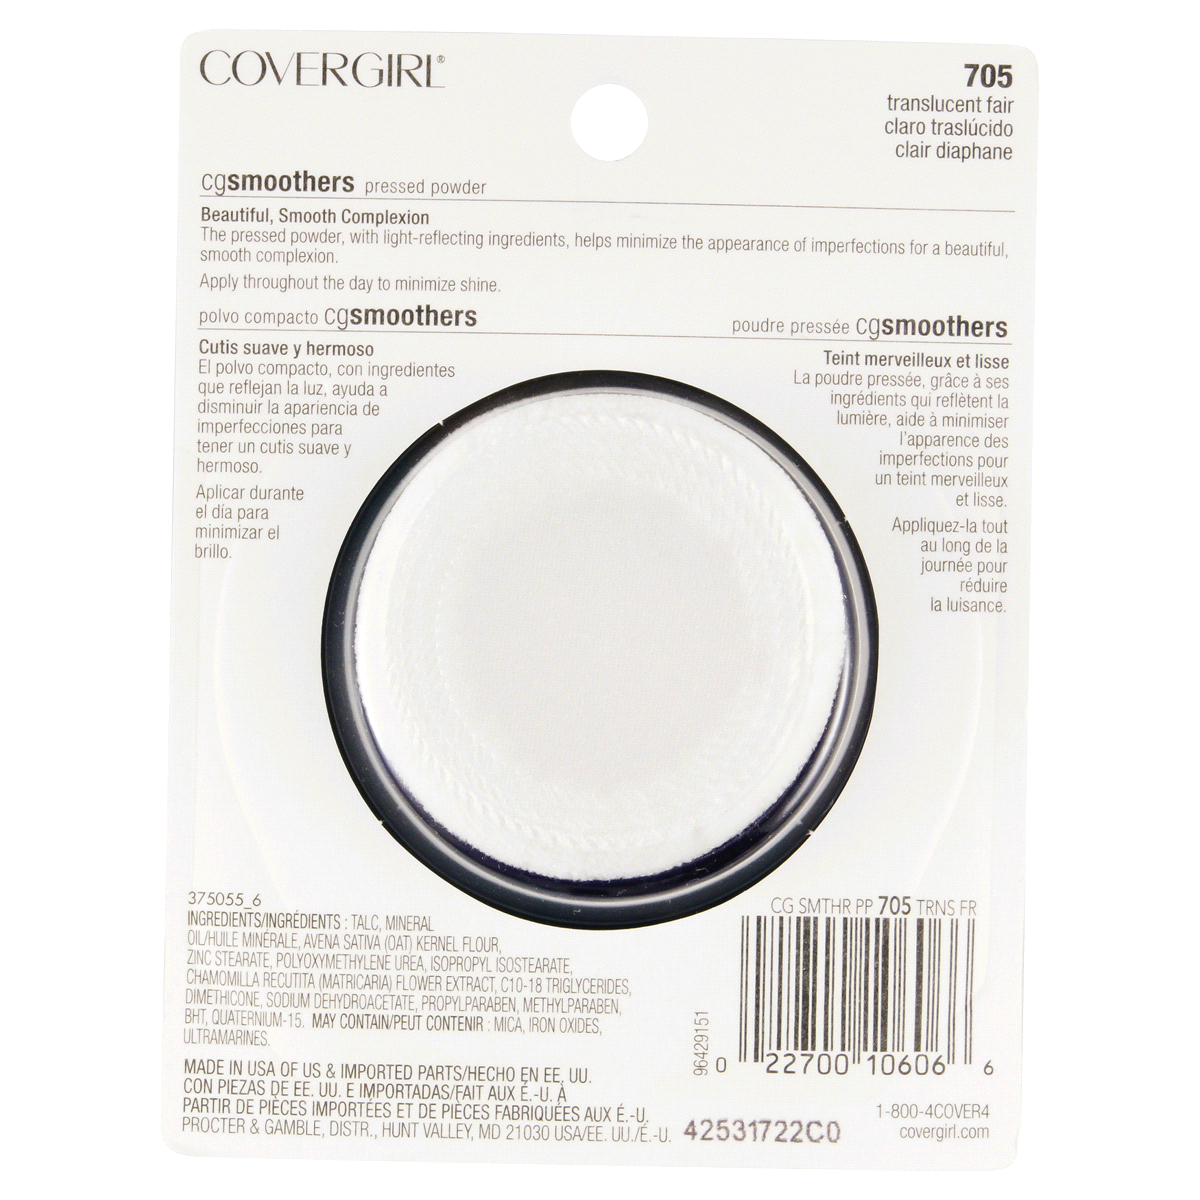 slide 2 of 2, COTY COVERGIRL COVERGIRL Smoothers Pressed Powder Powder, Translucent Fair 705, 0.32 oz (9.3 g), 1 ct